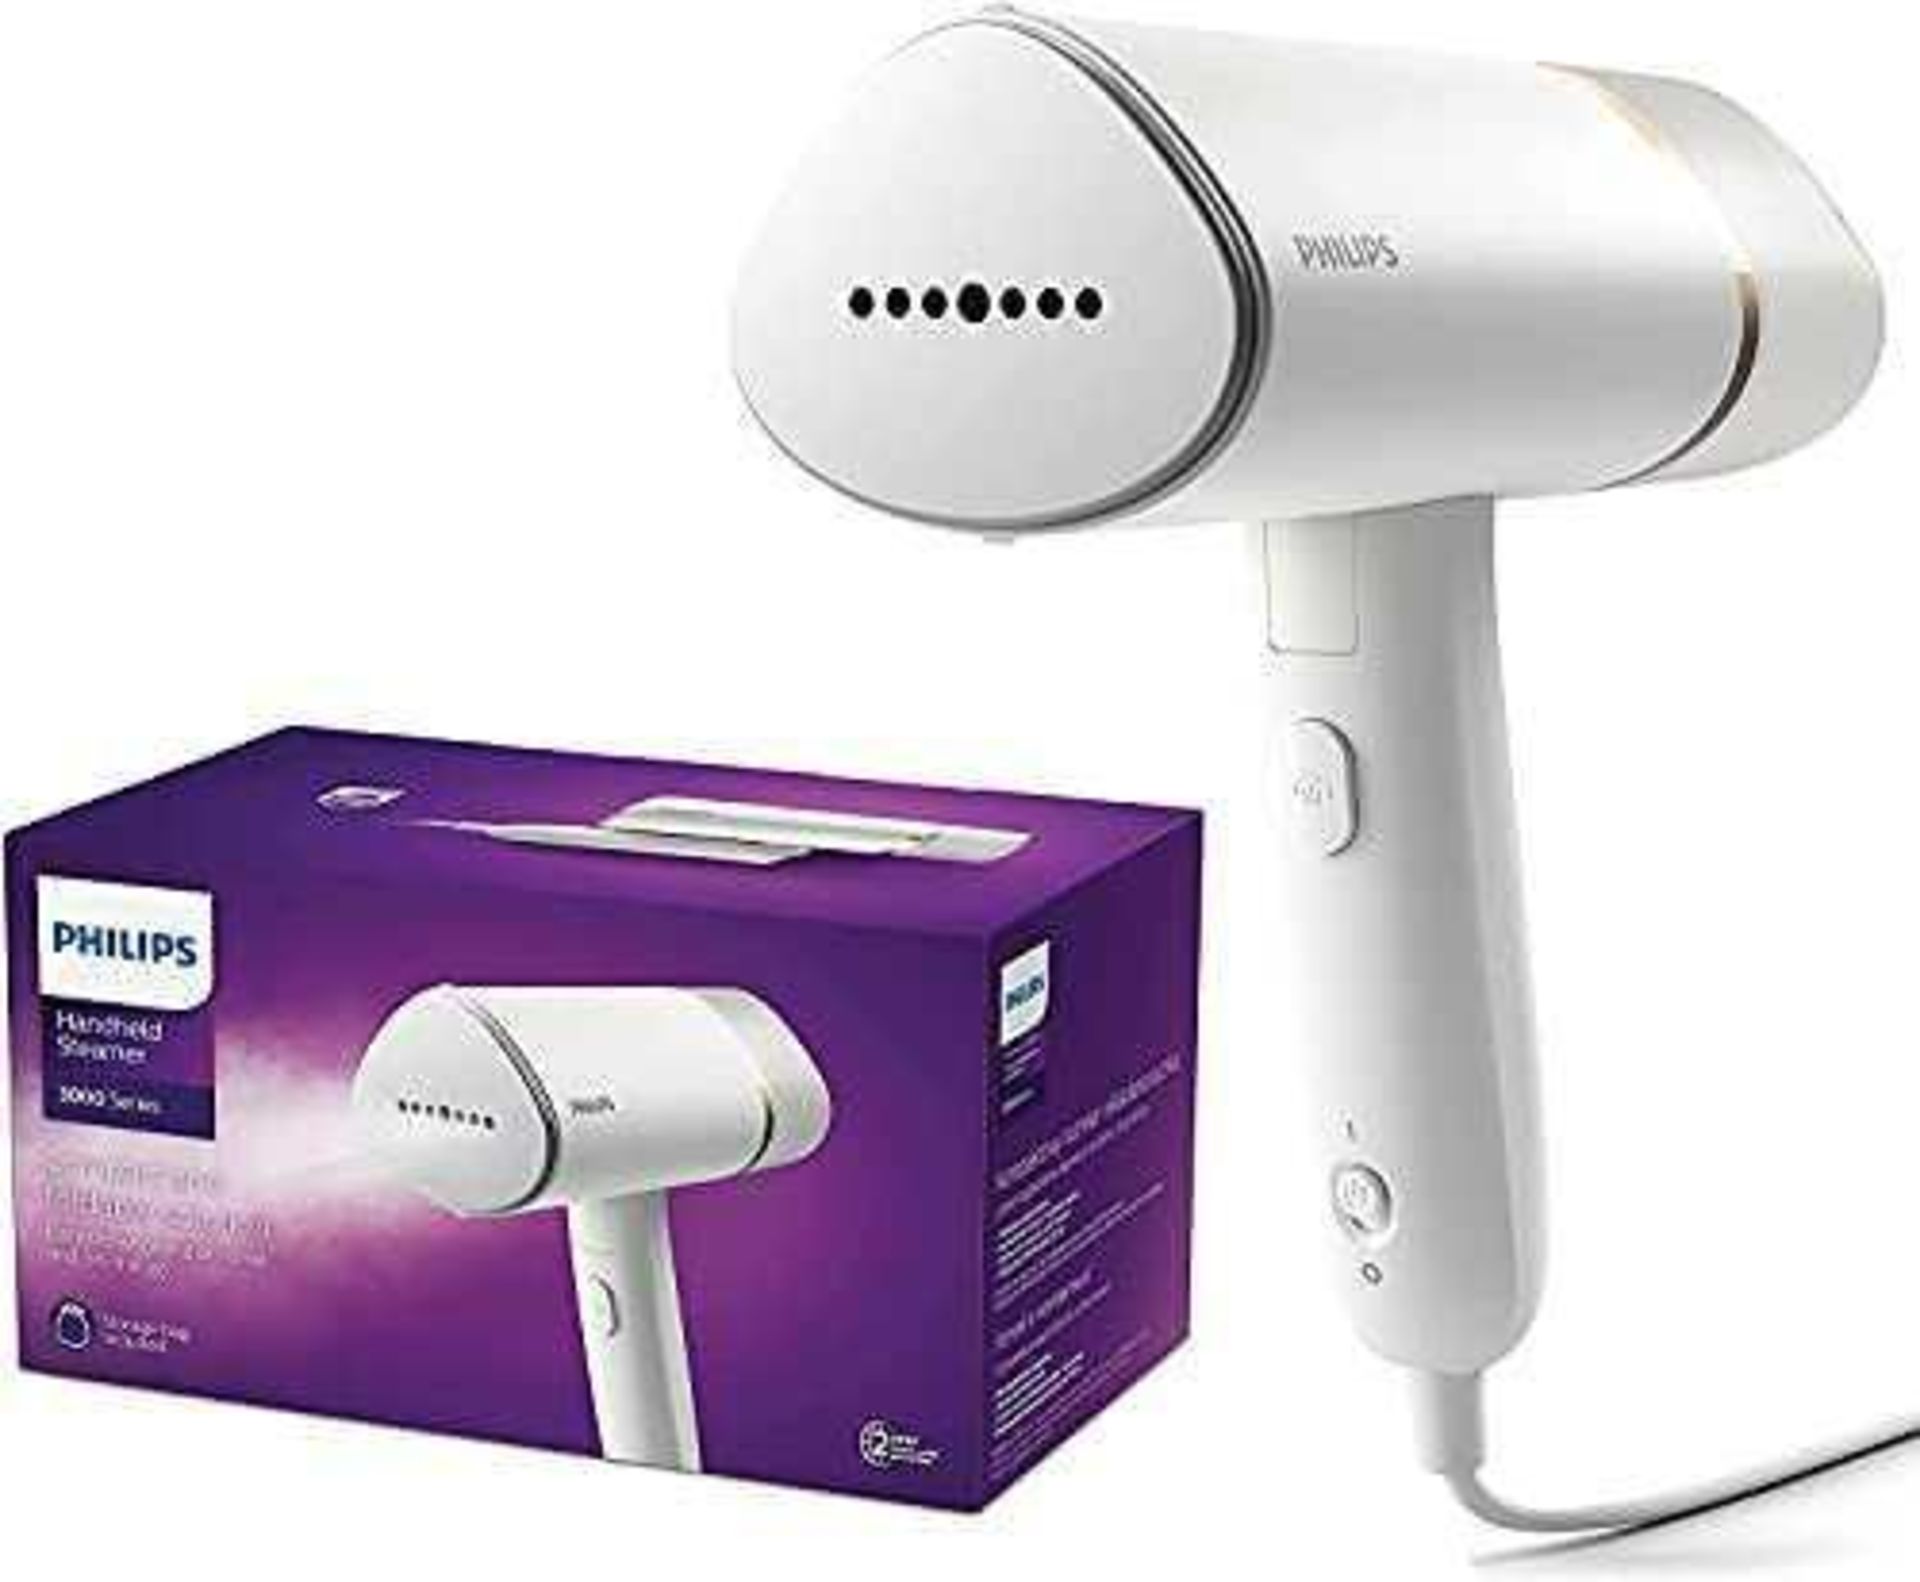 RRP £70 Lot To Contain X1 Boxed Phillips Handheld Steamer